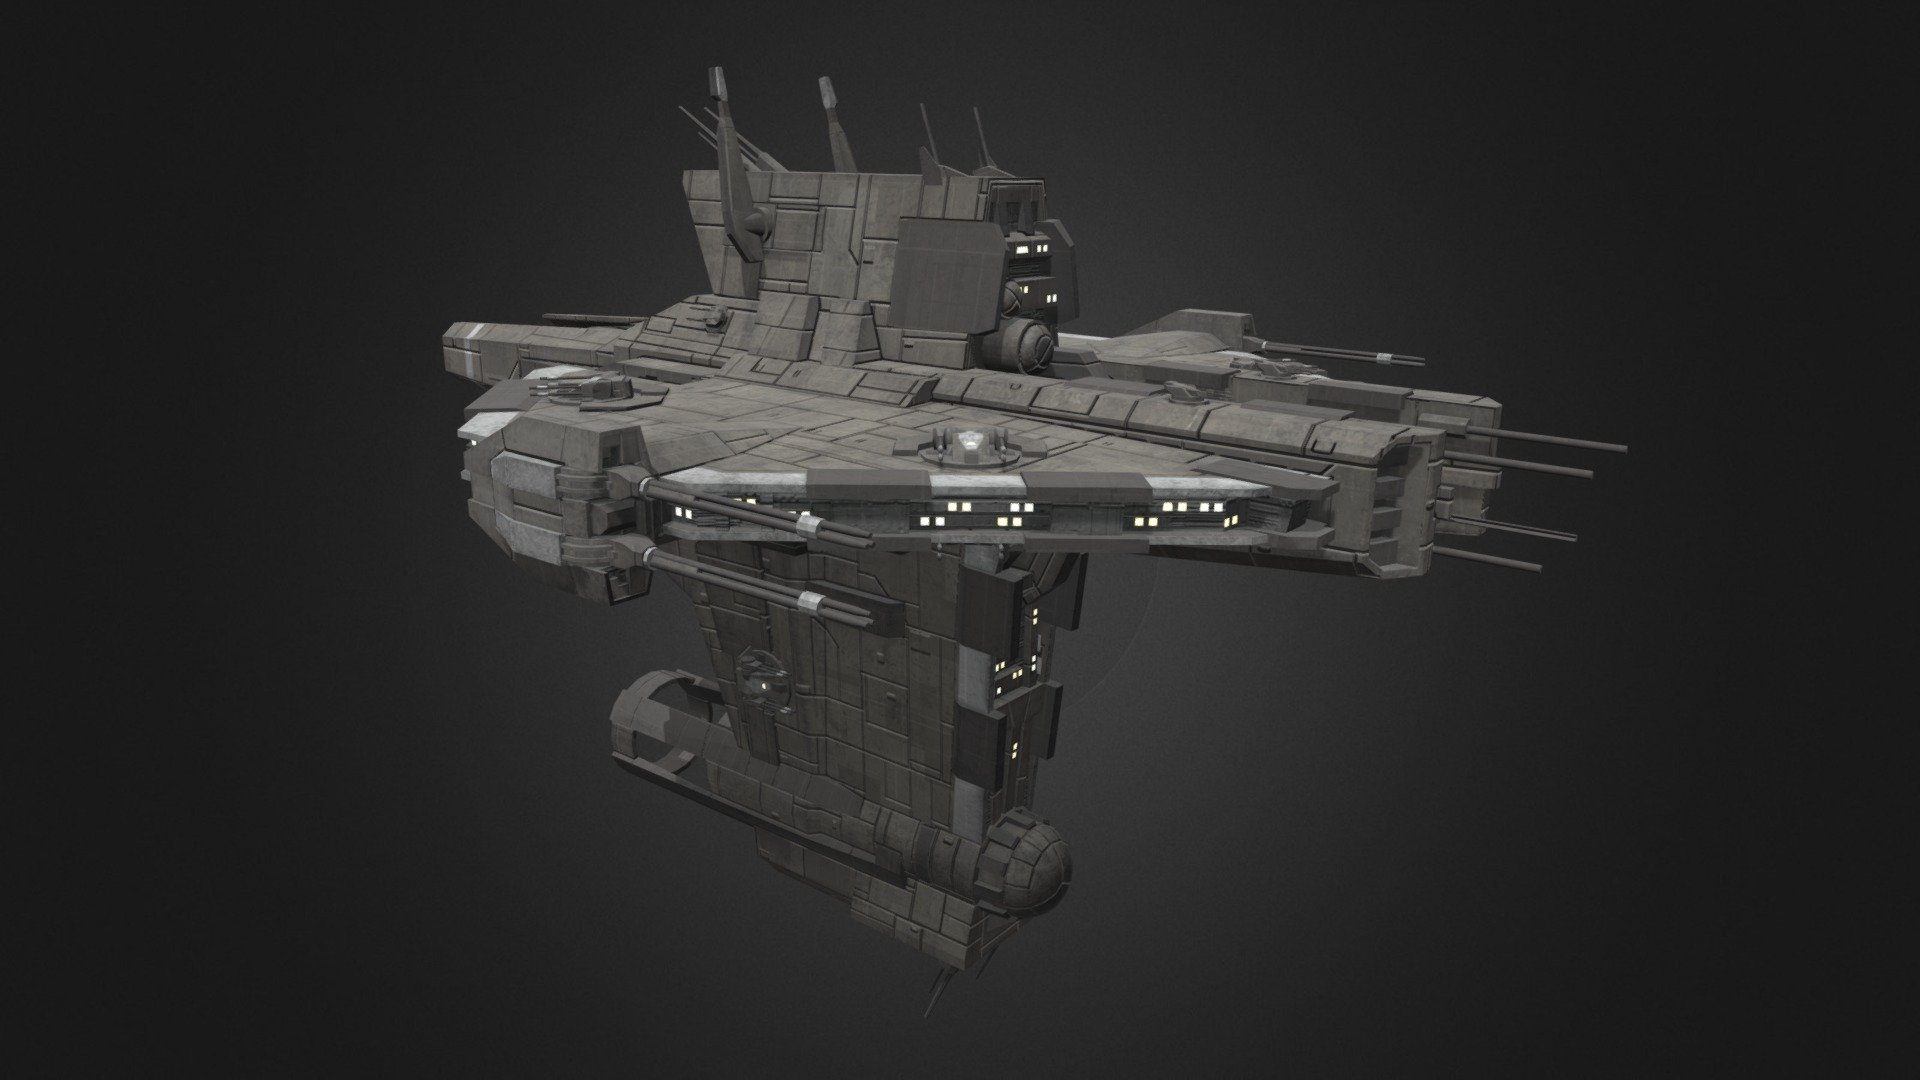 My verision of the Vengeance Frigate for a Star Wars Emipre at War Mod. Please do not use in other Star wars Empire at War Mods. I always had a problem with how over the top the guns on the side were so I made them smaller and put then in turrets so they could be used better.

The ship is armed with: 2 Double Heavy Mass Drivers Turrets, 10 Quad Turbolaser Turrets, and 10 Quad Laser Turrets

The ship also comes with a cloaking device but no shields 3d model